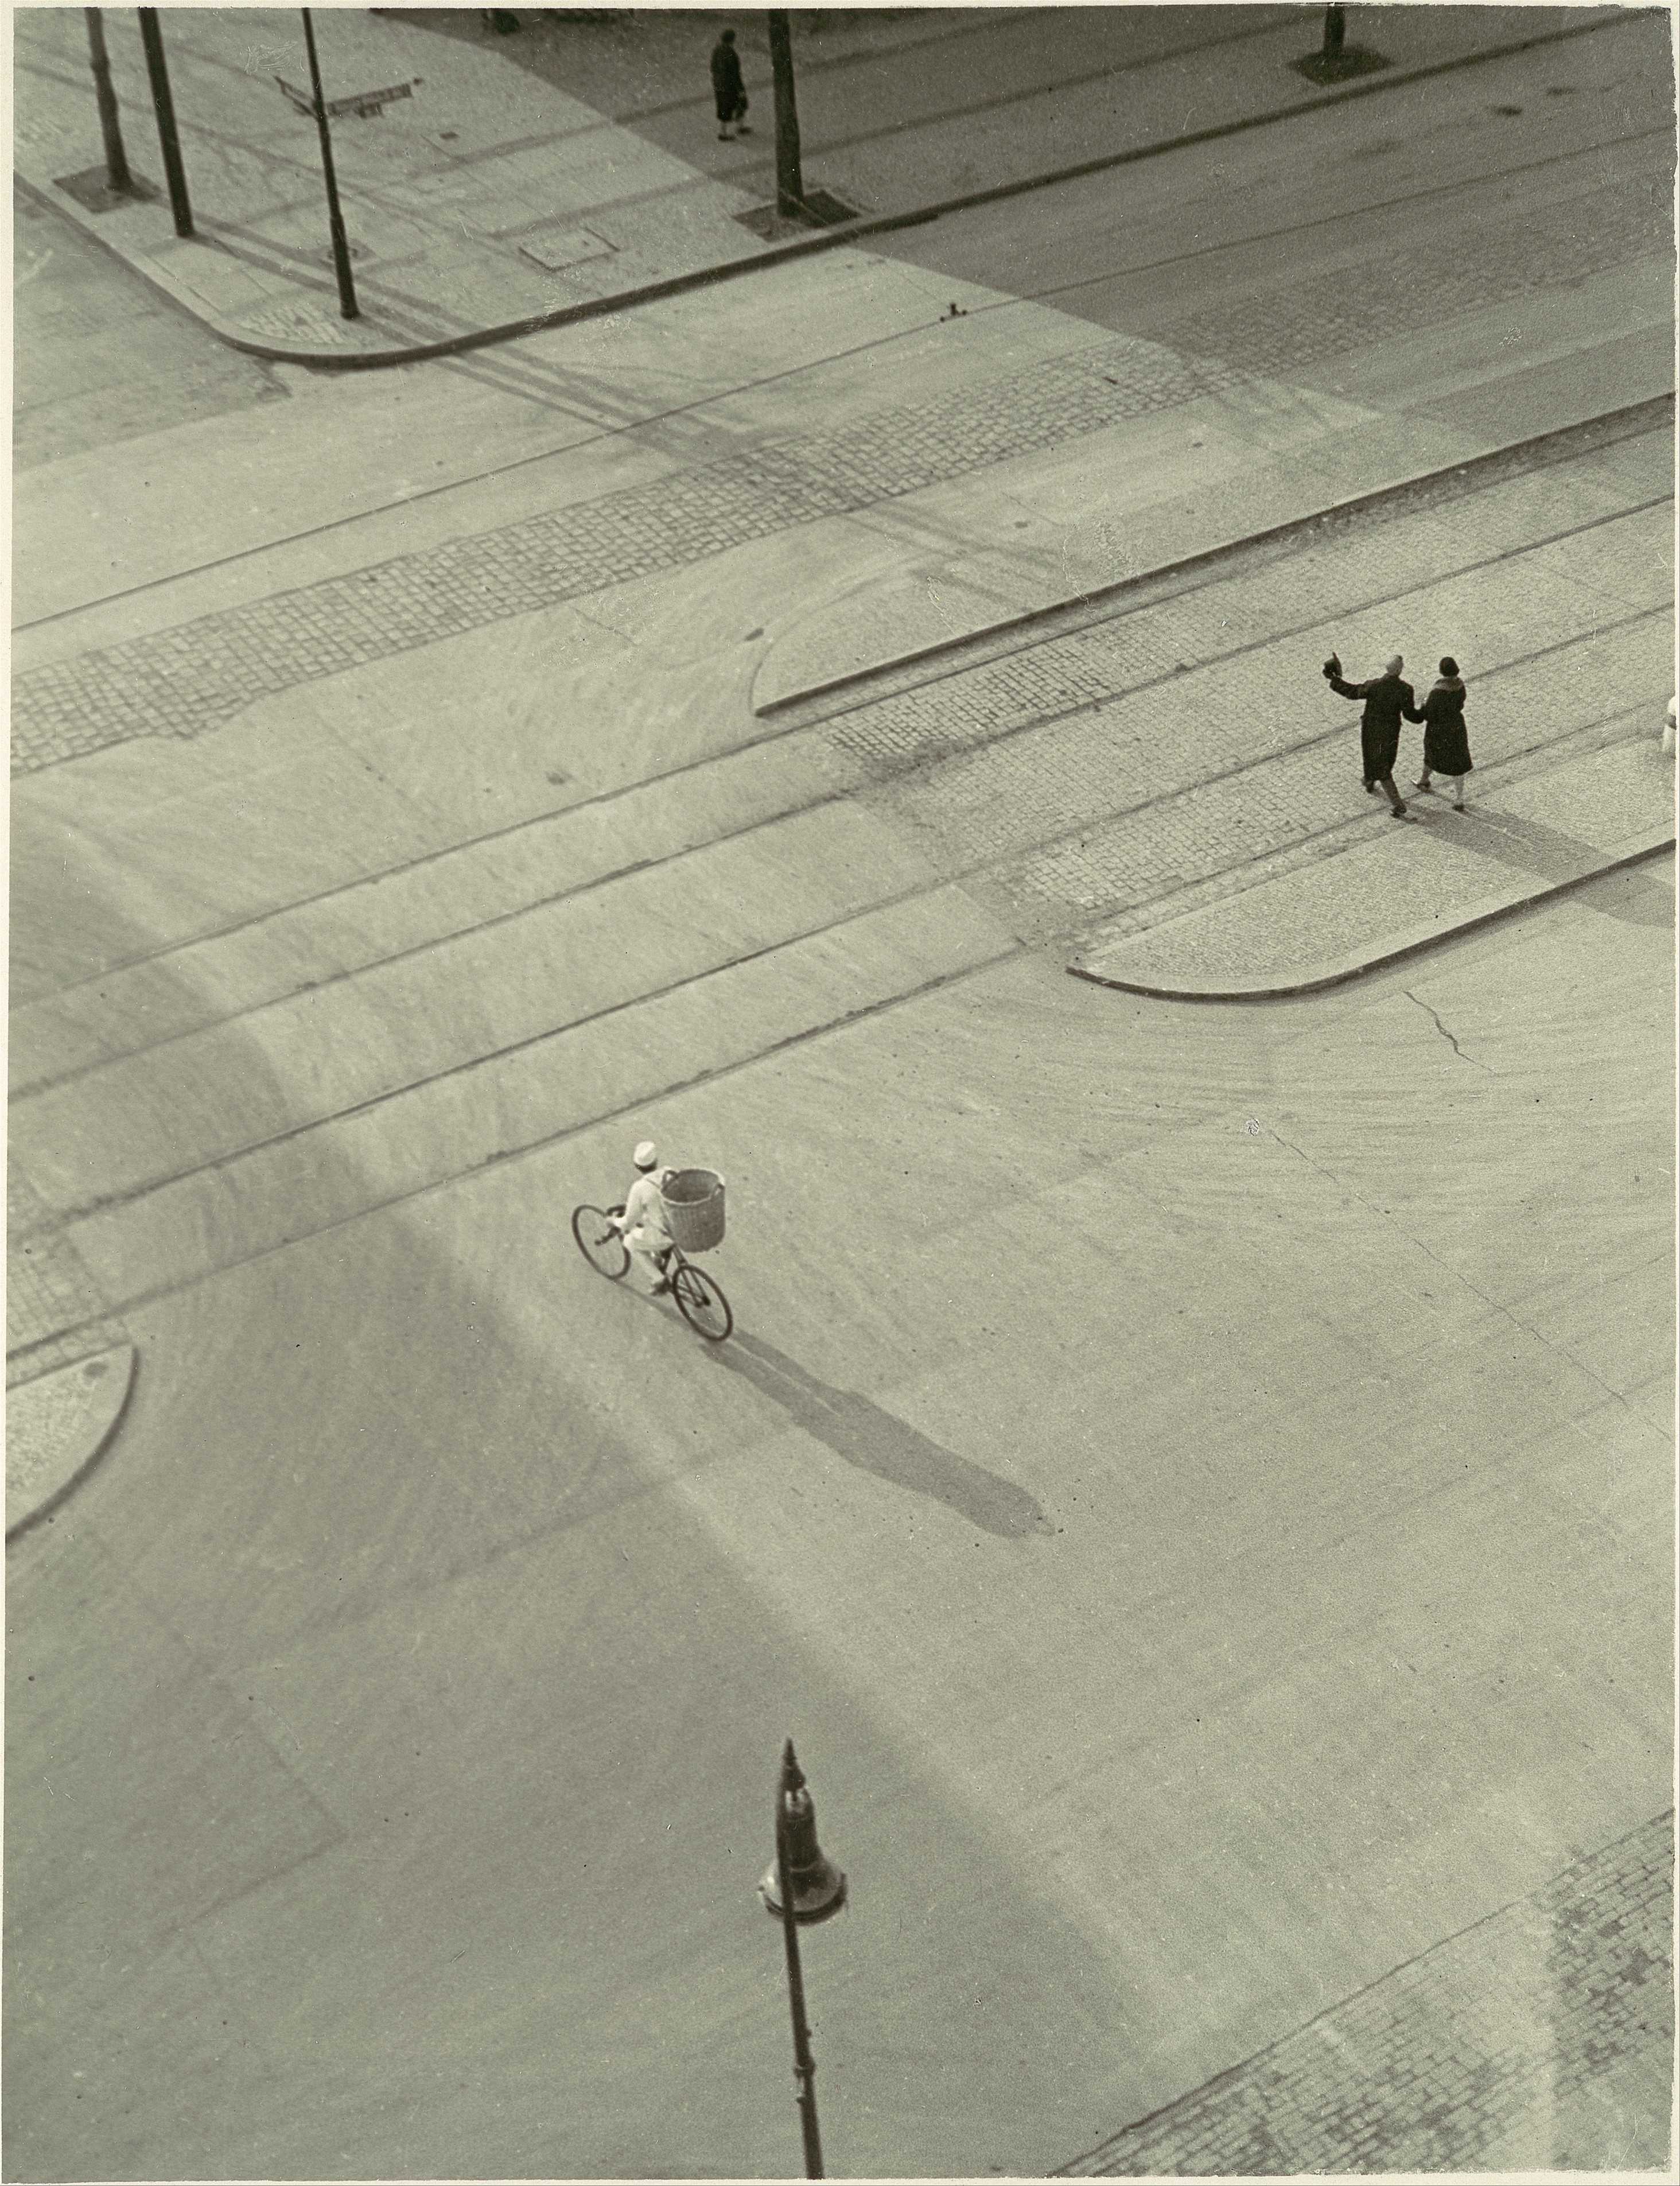 Find out more about László Moholy-Nagy - 7 A.M. (New Year’s Morning)